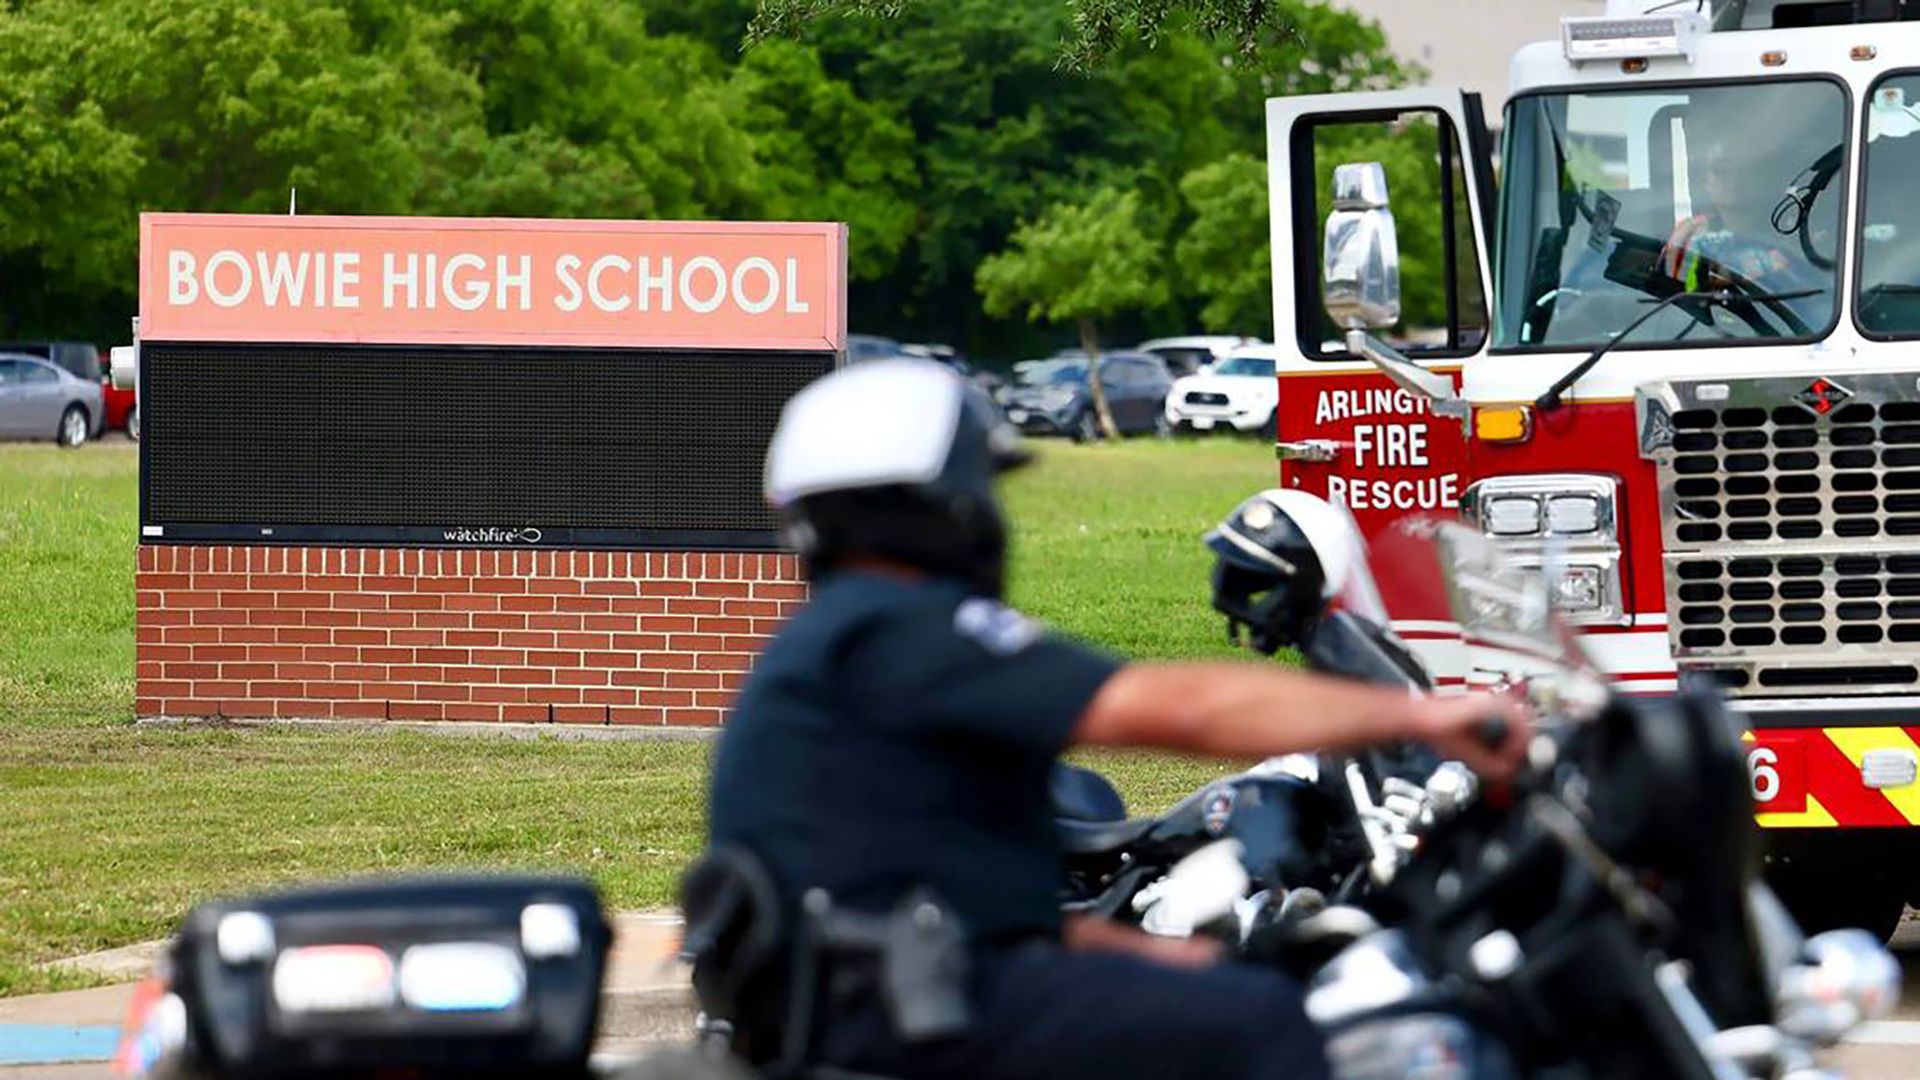 a photo of a motorcycle police officer driving by Bowie High School